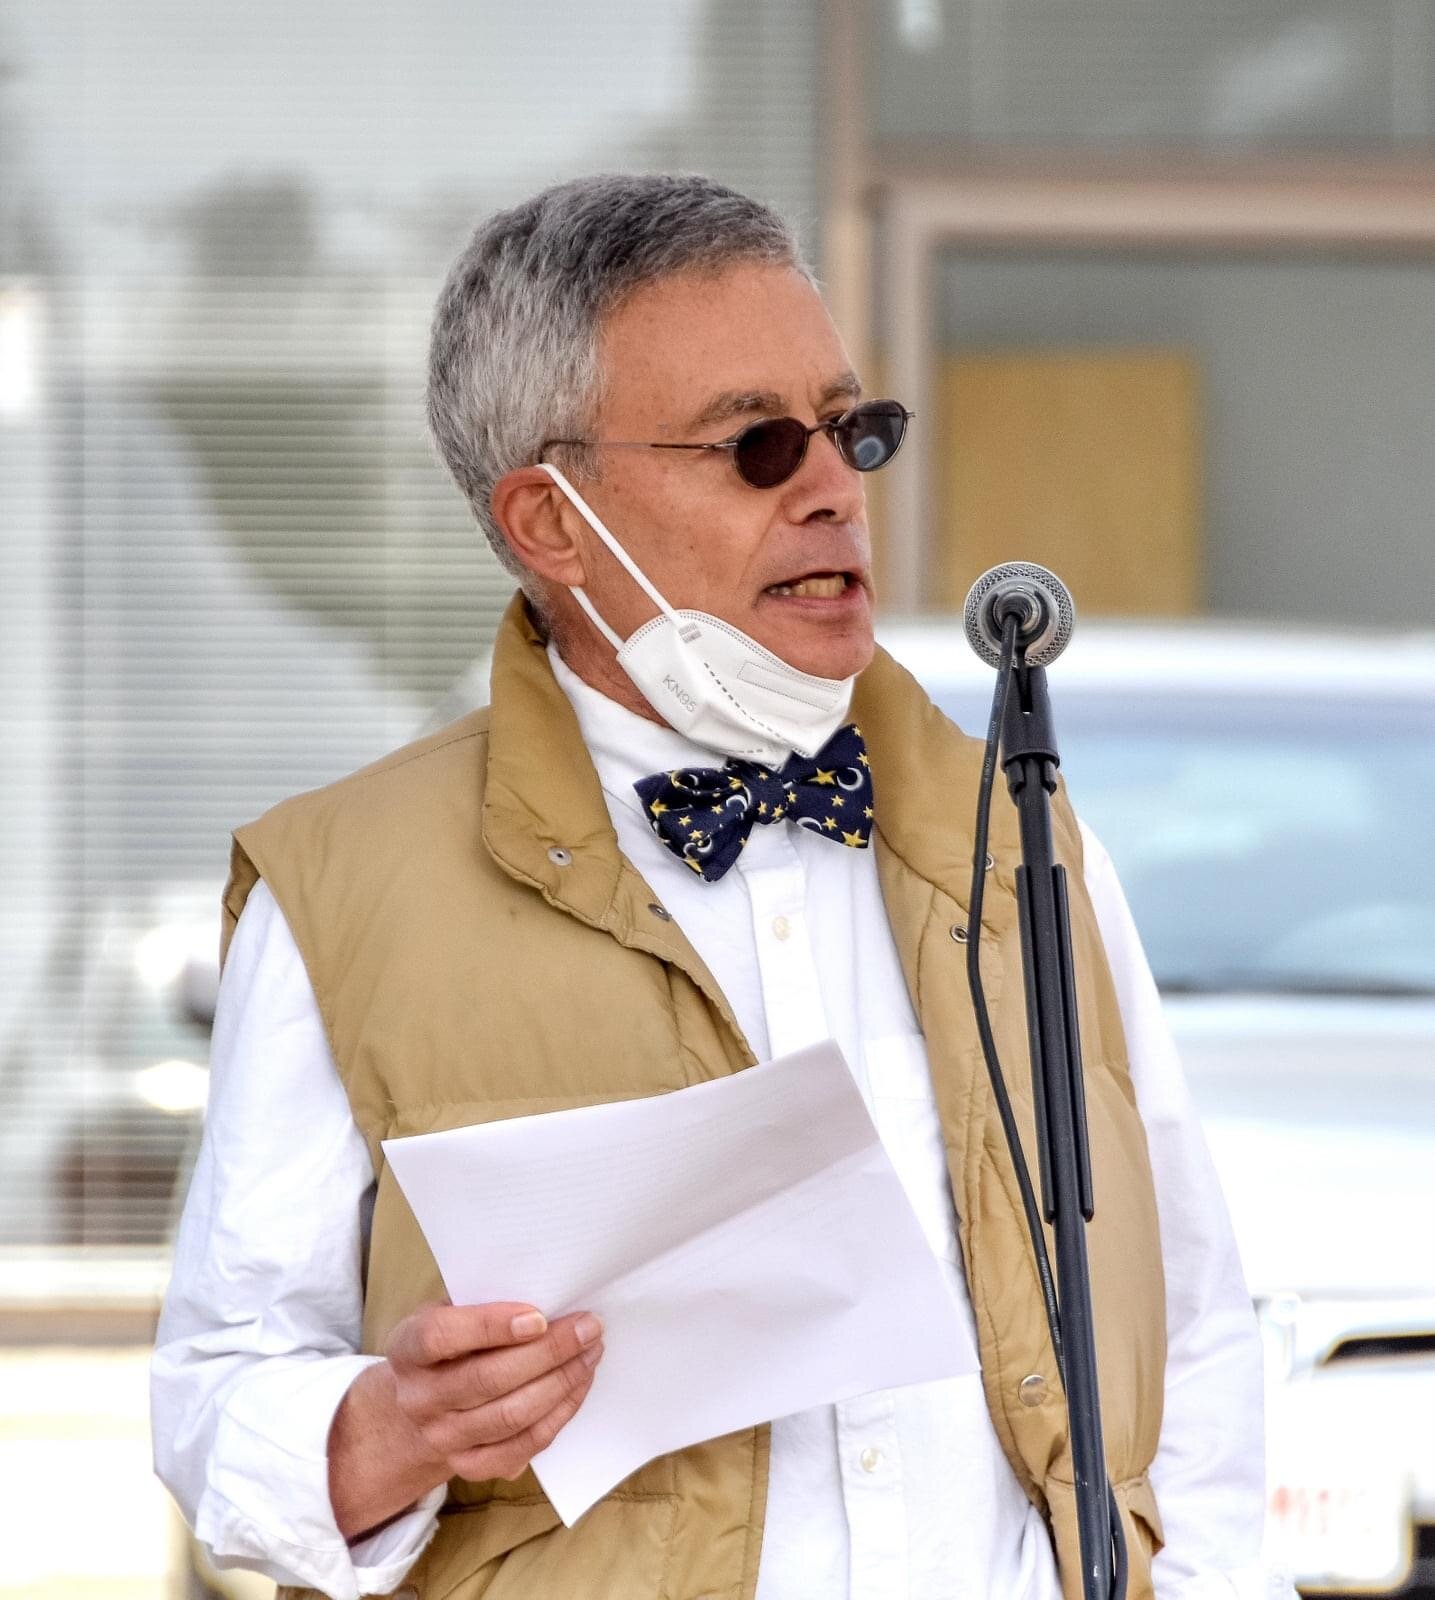 Former CEO Edward Sayer speaking at grand opening celebration, April 28th 2021 (photo credit to Mitchell Grosky)